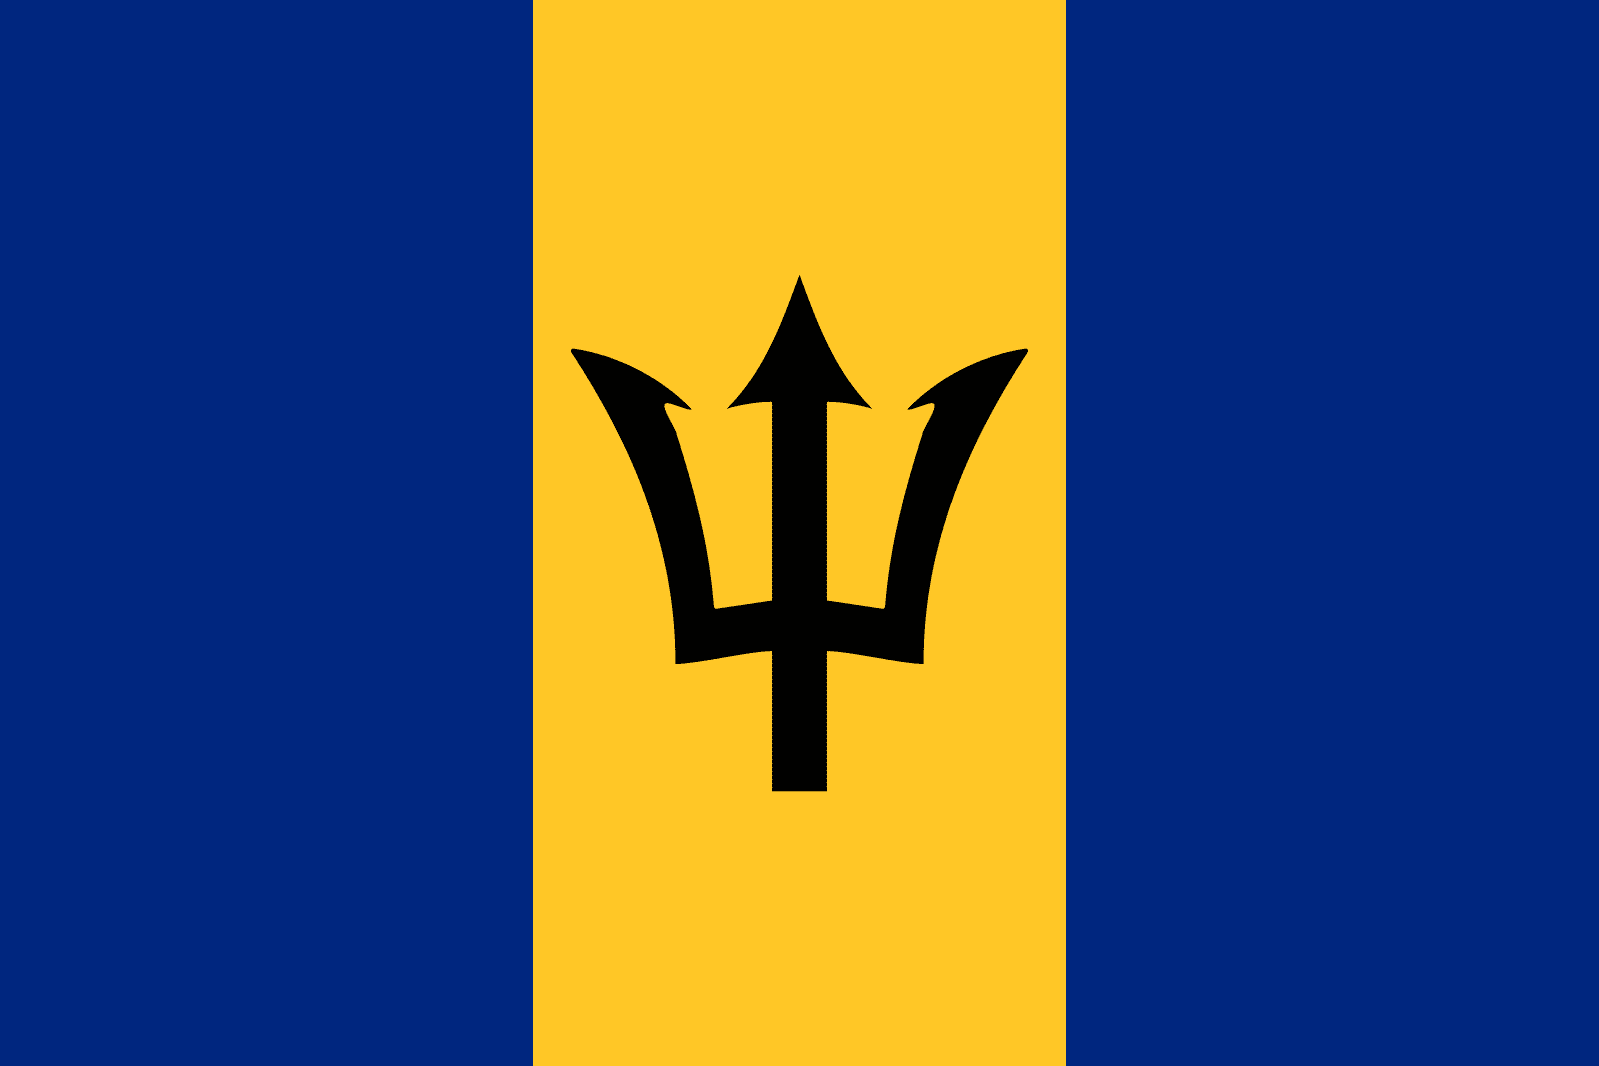 Facts of Barbados